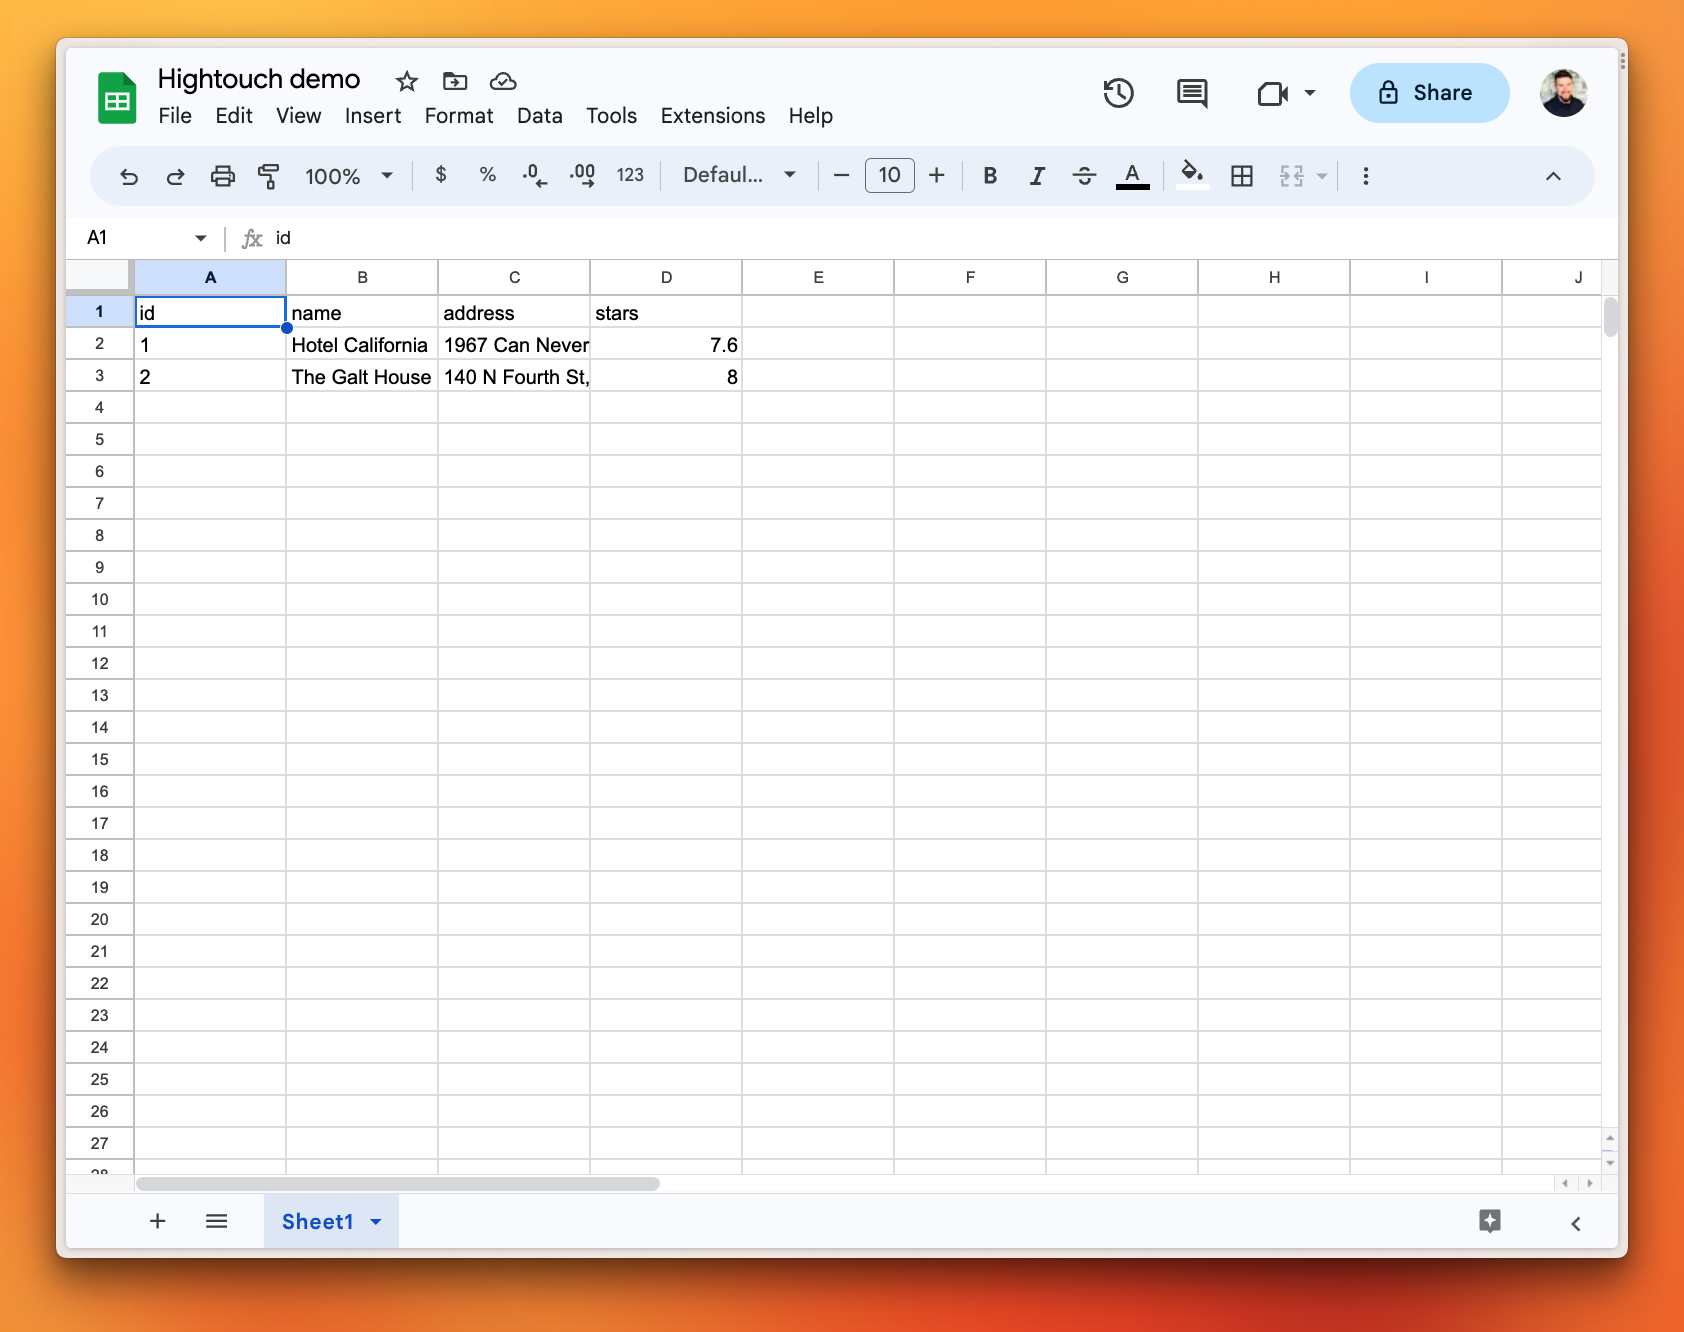 The data synced to Google Sheets